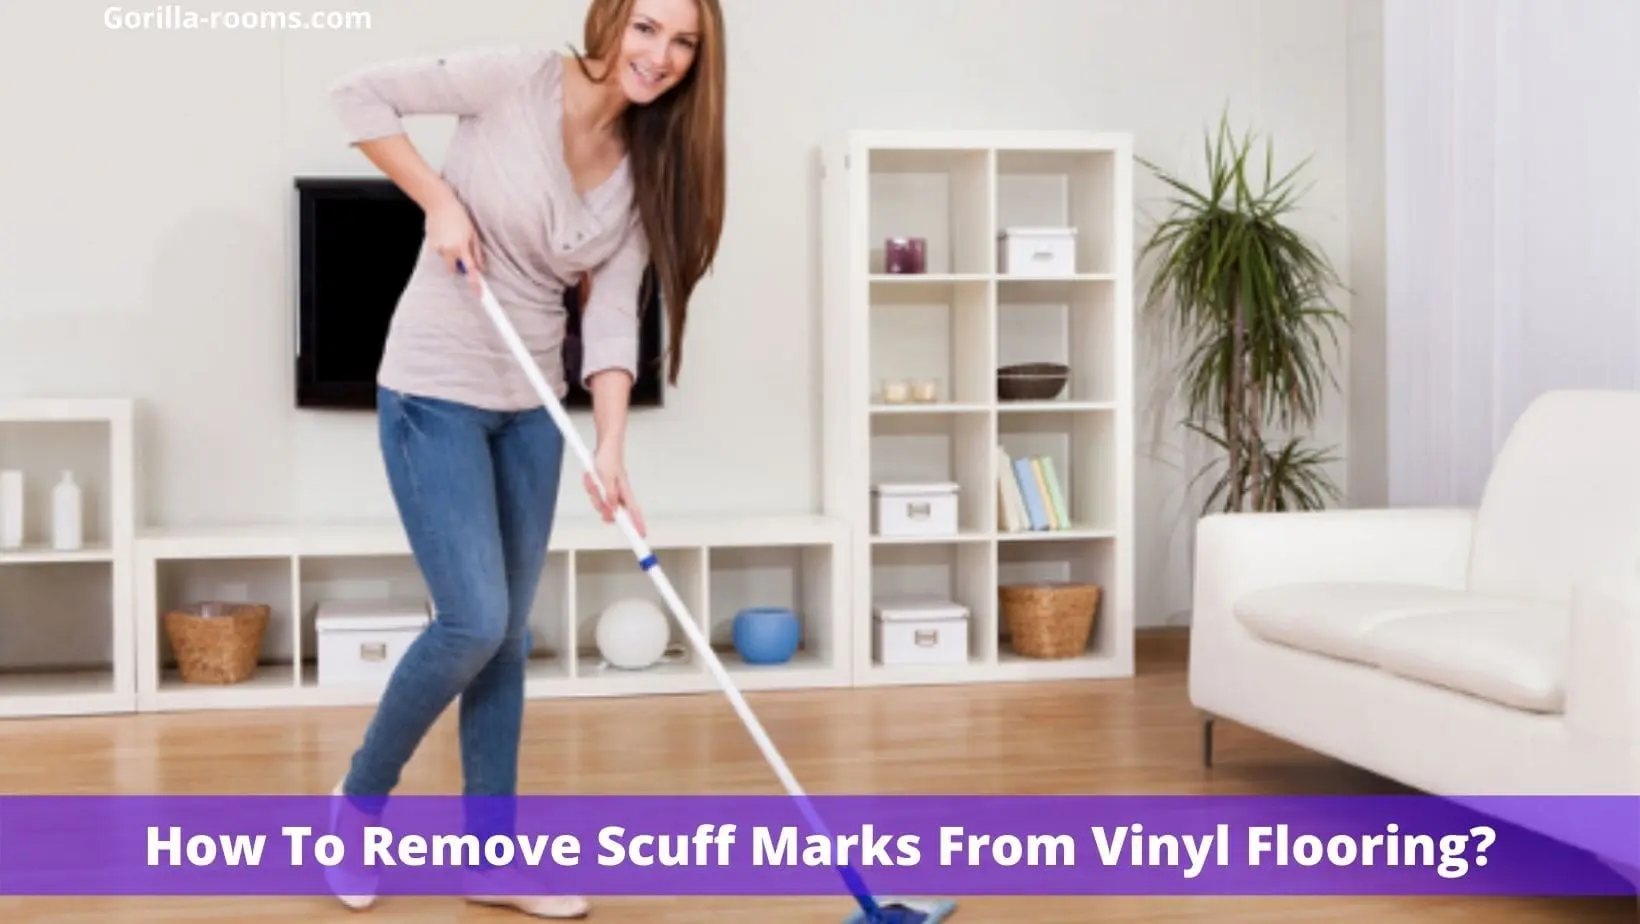 How To Remove Scuff Marks From Vinyl Flooring